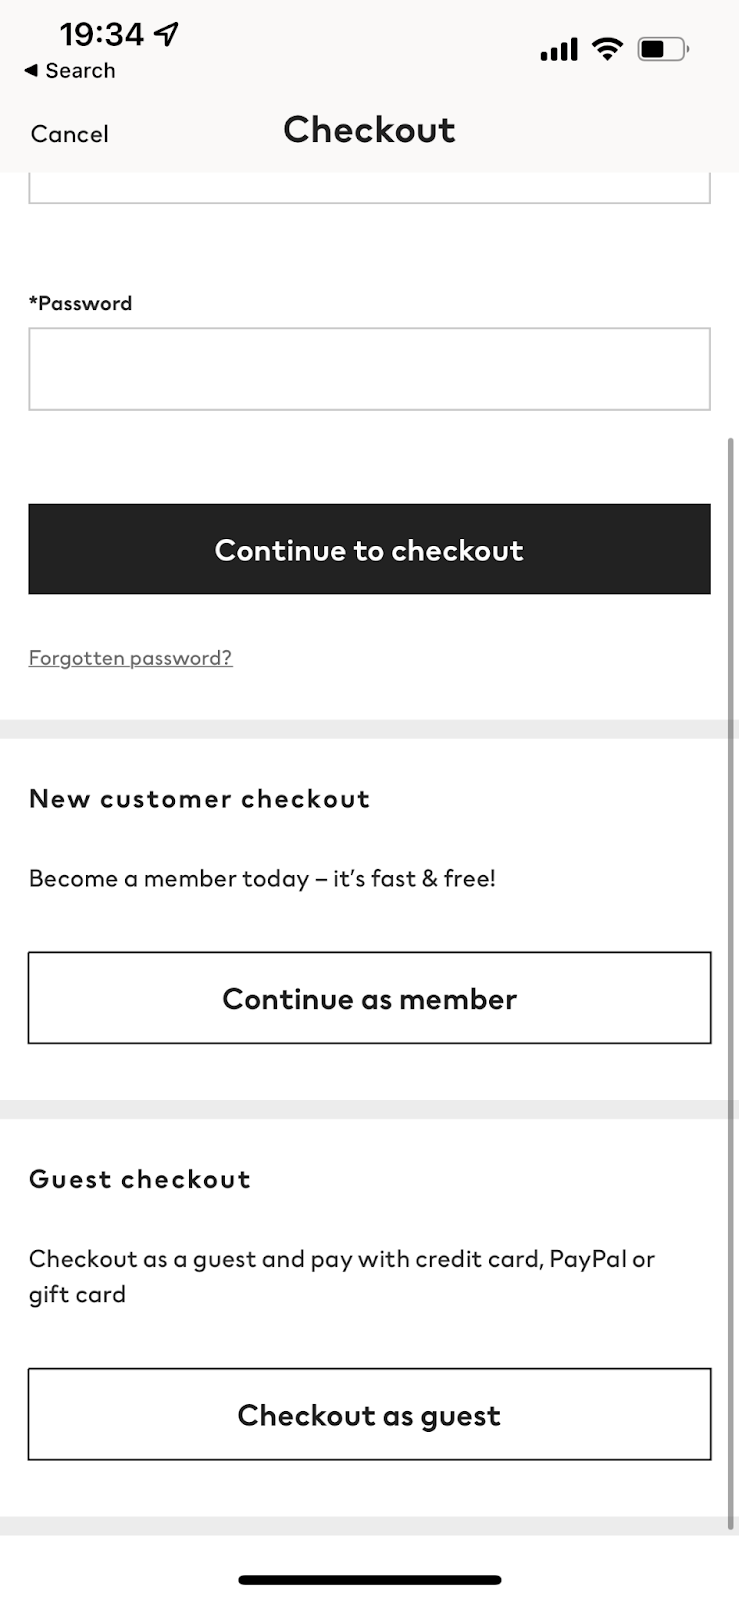 H&M's checkout page with "Continue as member" and "Checkout as guest" options